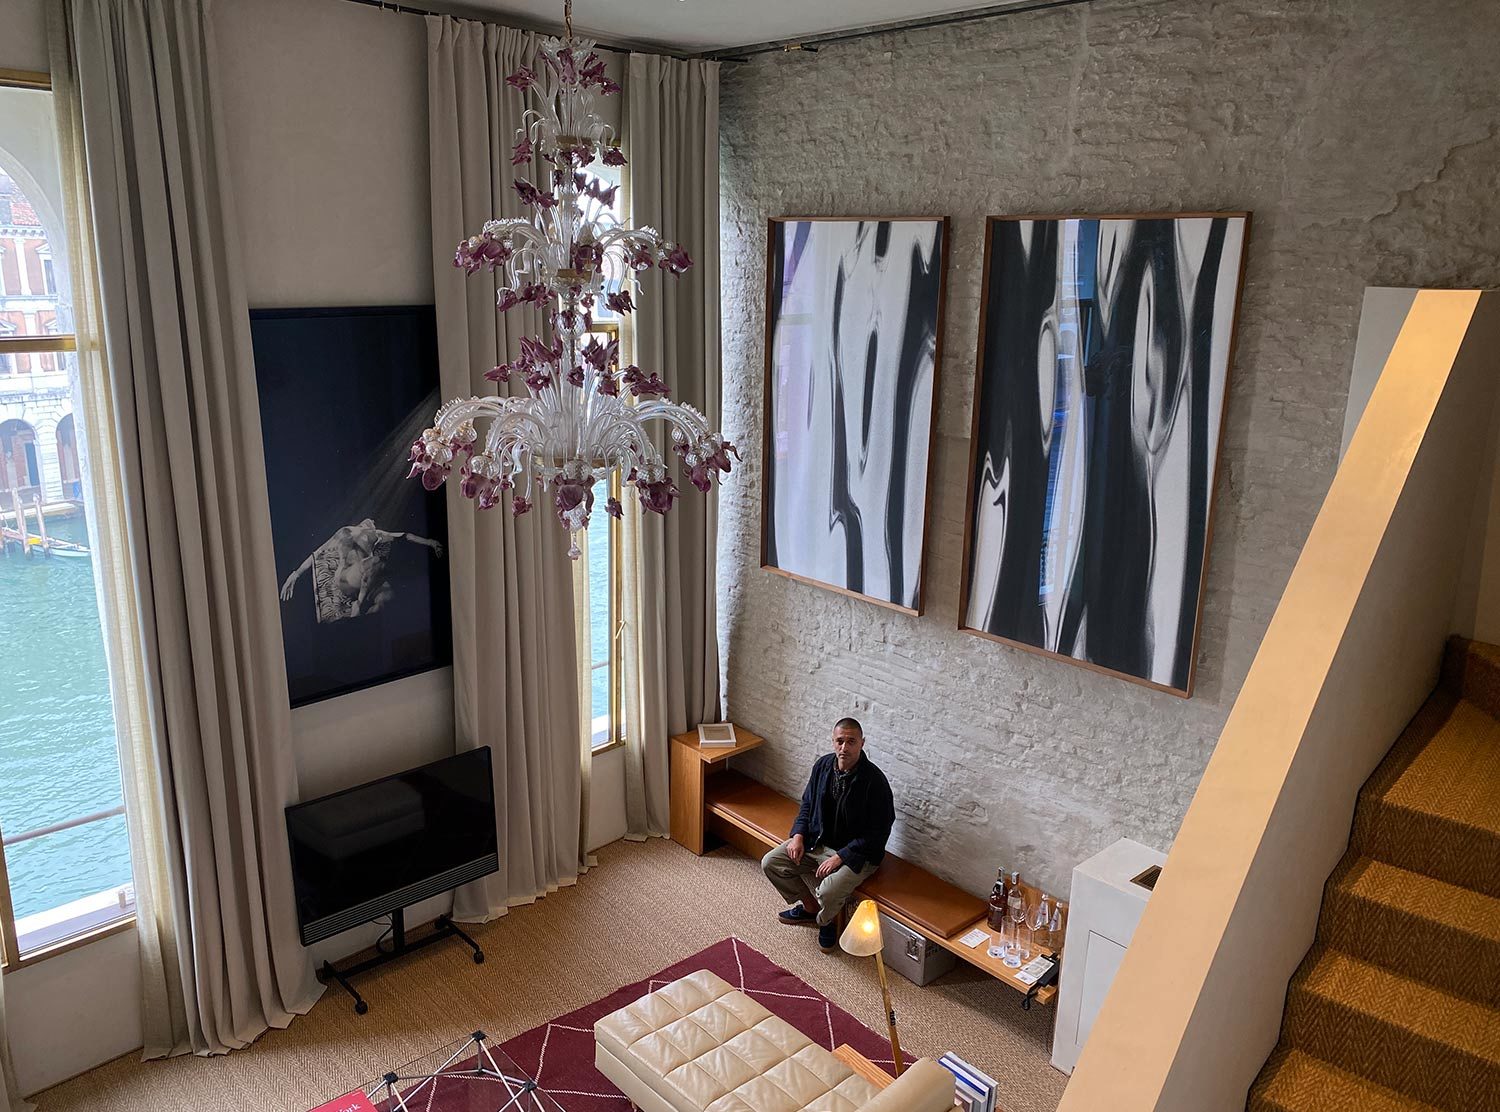 The Venice Venice Hotel The scale of Room 25 is remarkable: Impressive high ceilings and oversized artworks by Venetian photographer Renato Dagostin